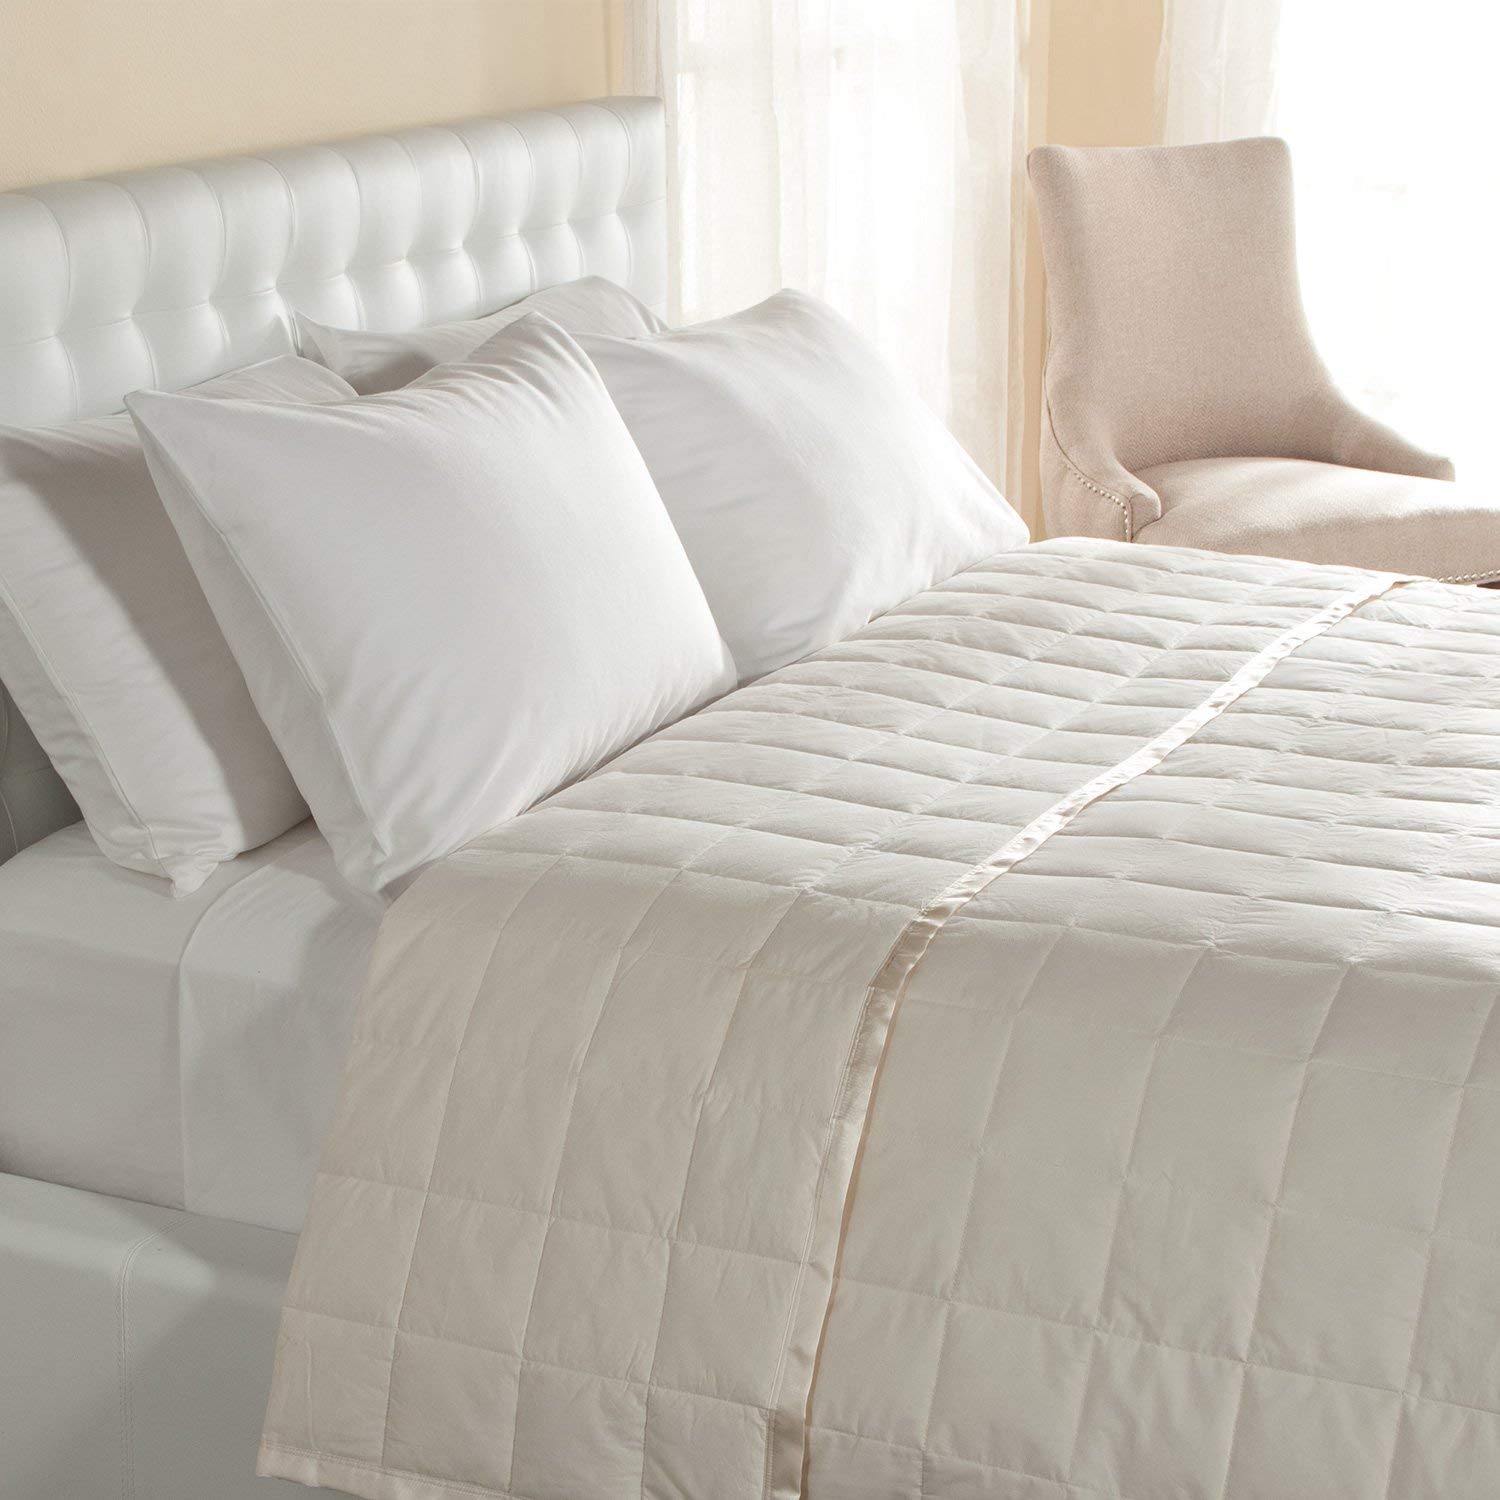 a satin trim blanket on a bed